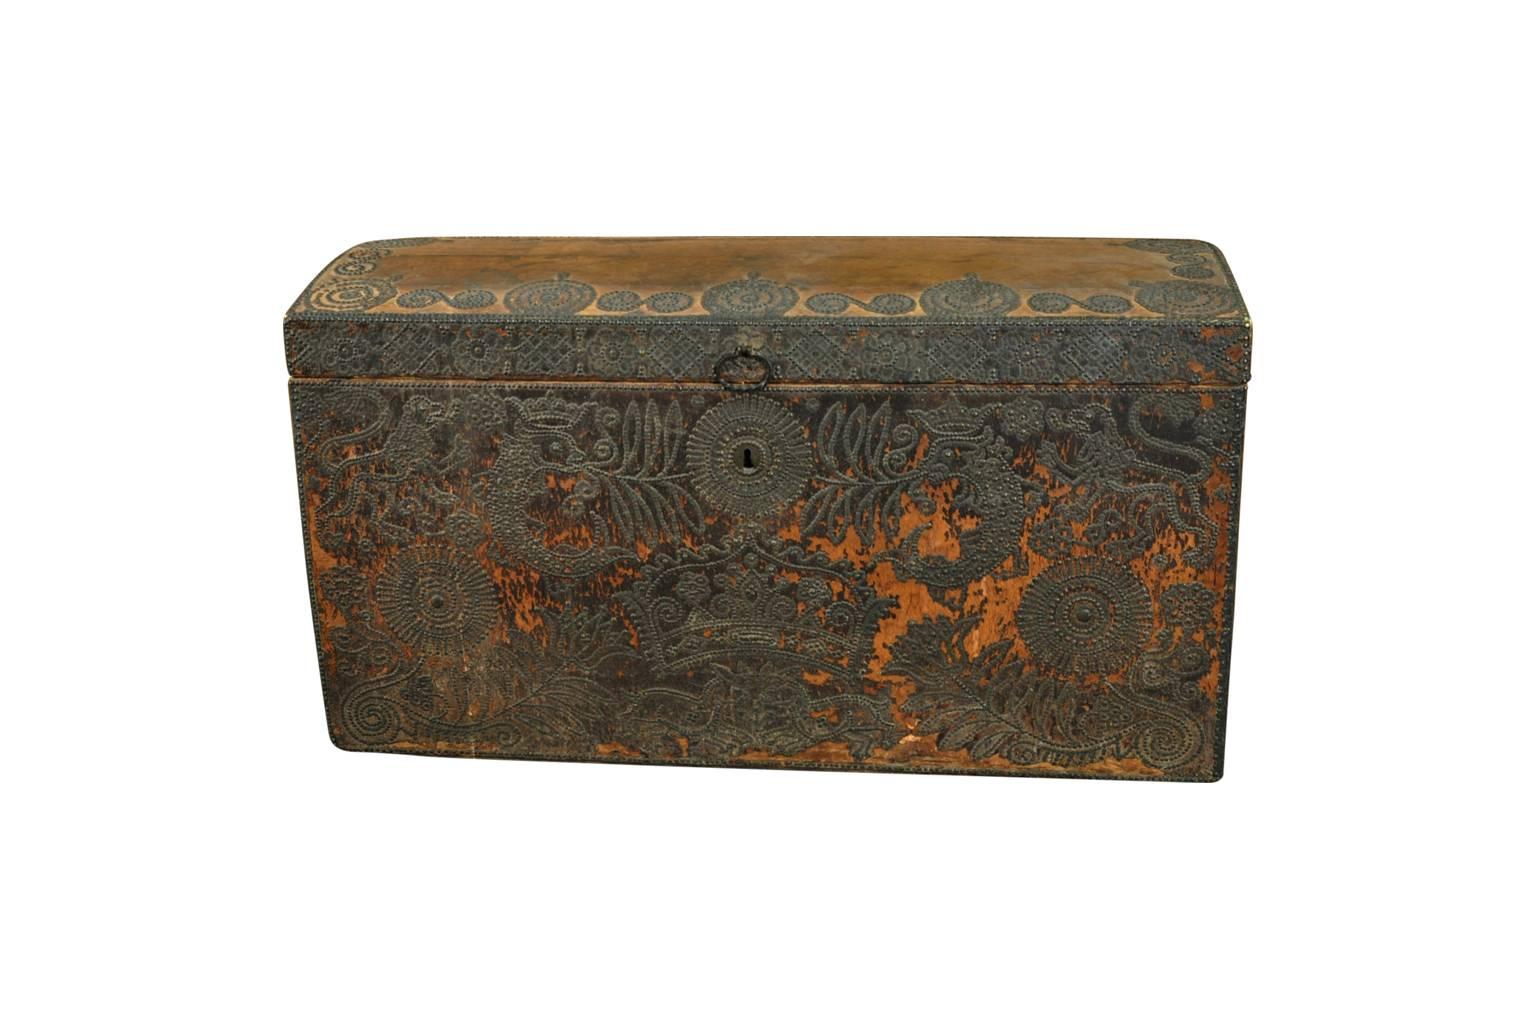 An exceptional 18th century Marriage Trunk - Malle - from the Provence region of France. Soundly constructed from wood and clad in leather. Beautifully decorated with bronze nail heads in the form of petite flowers. Wonderfully decorated with